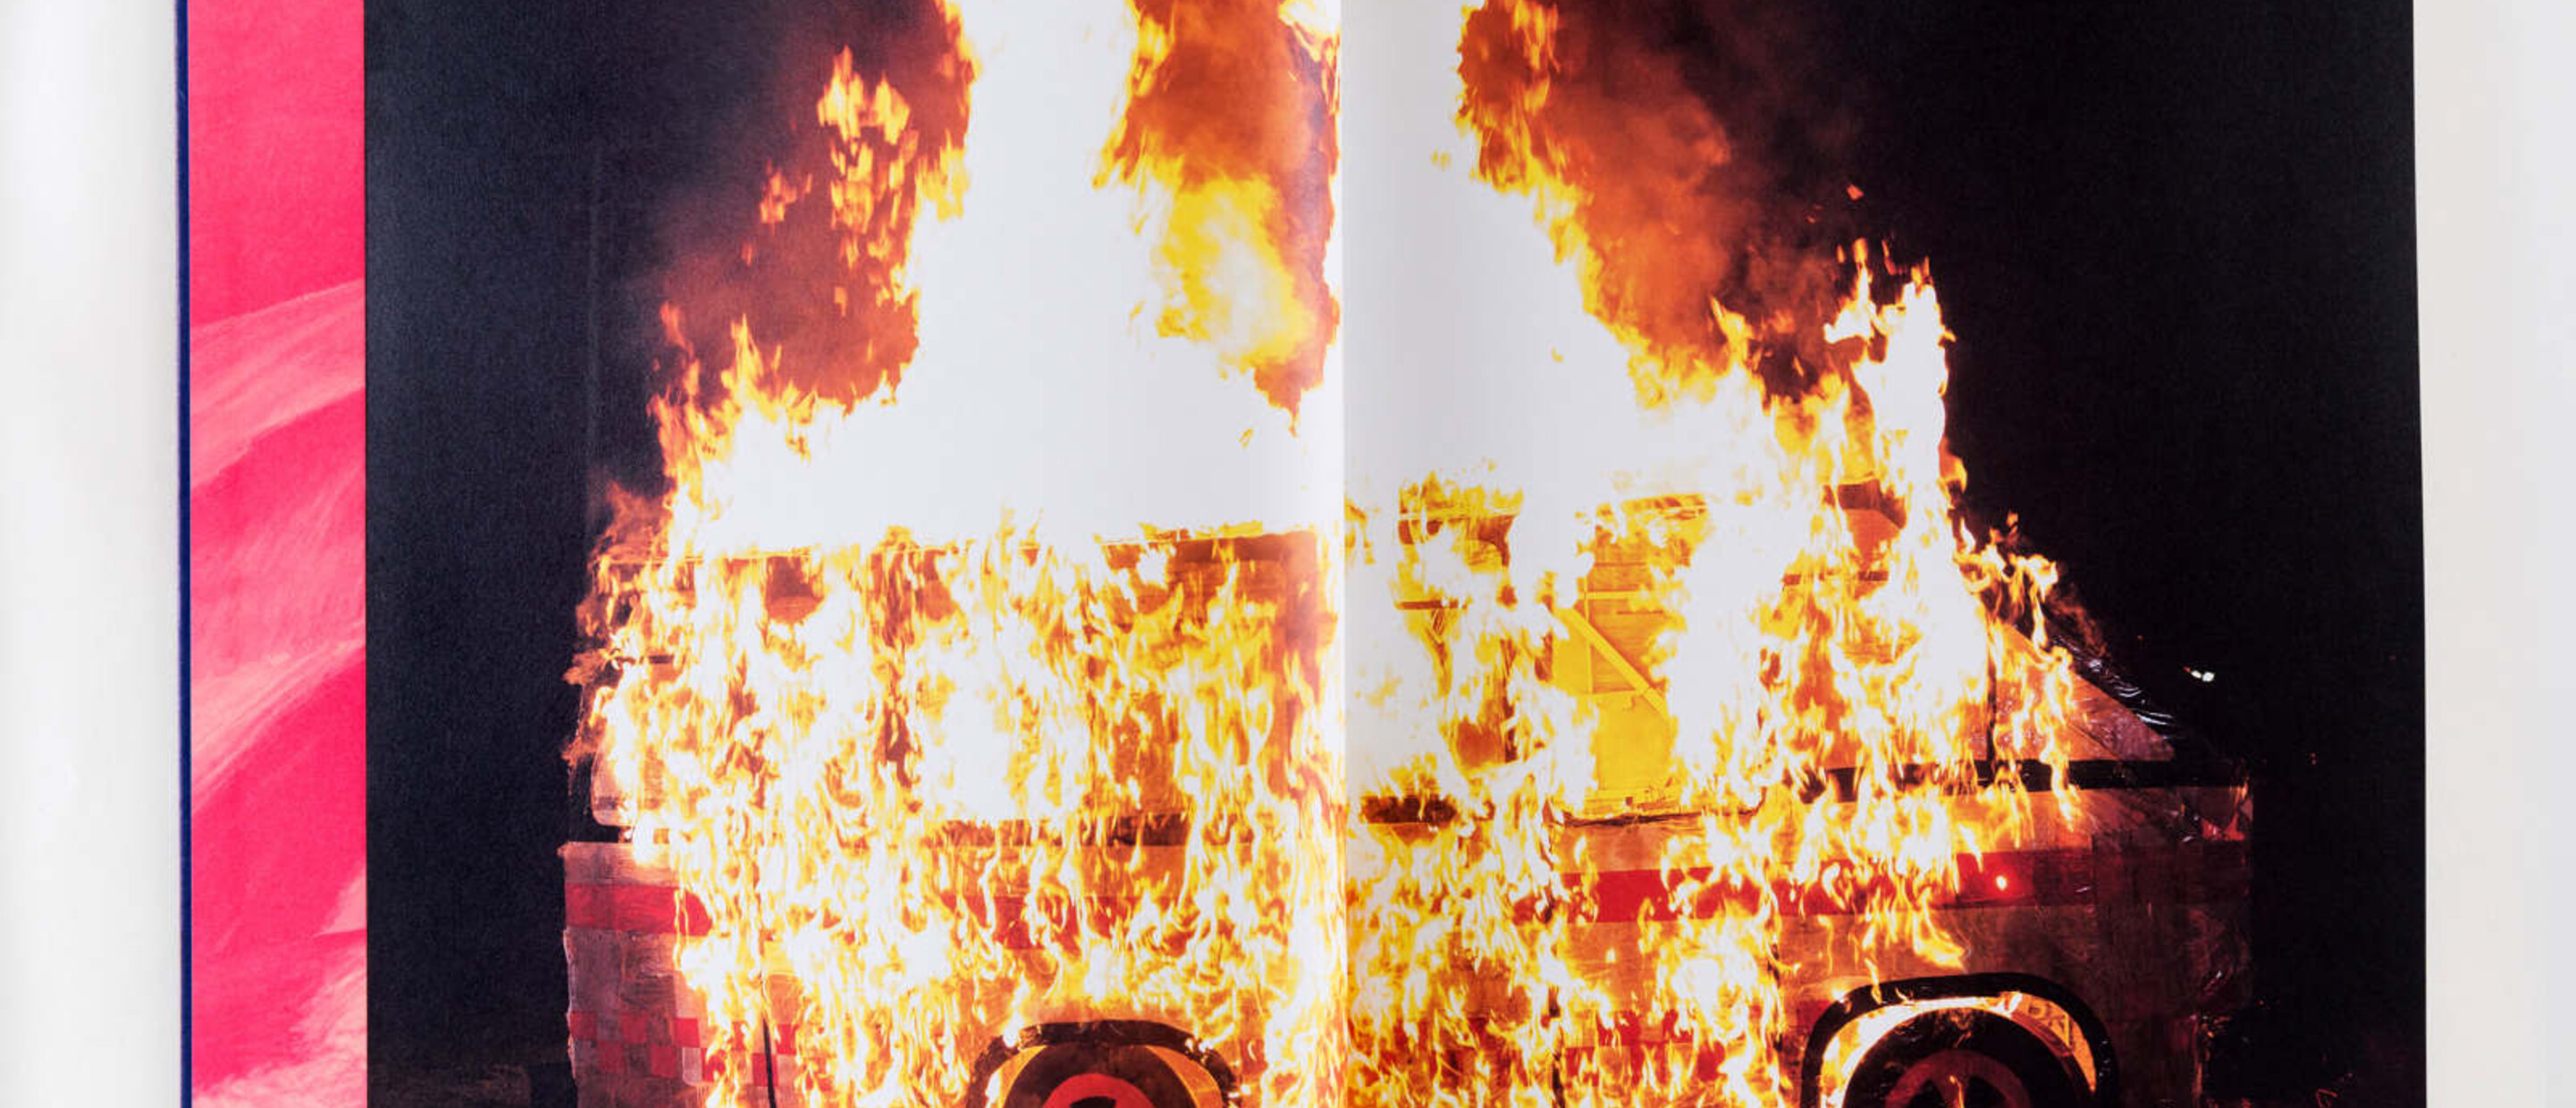 Catalogue spread of photo showing microbus engulfed in flame